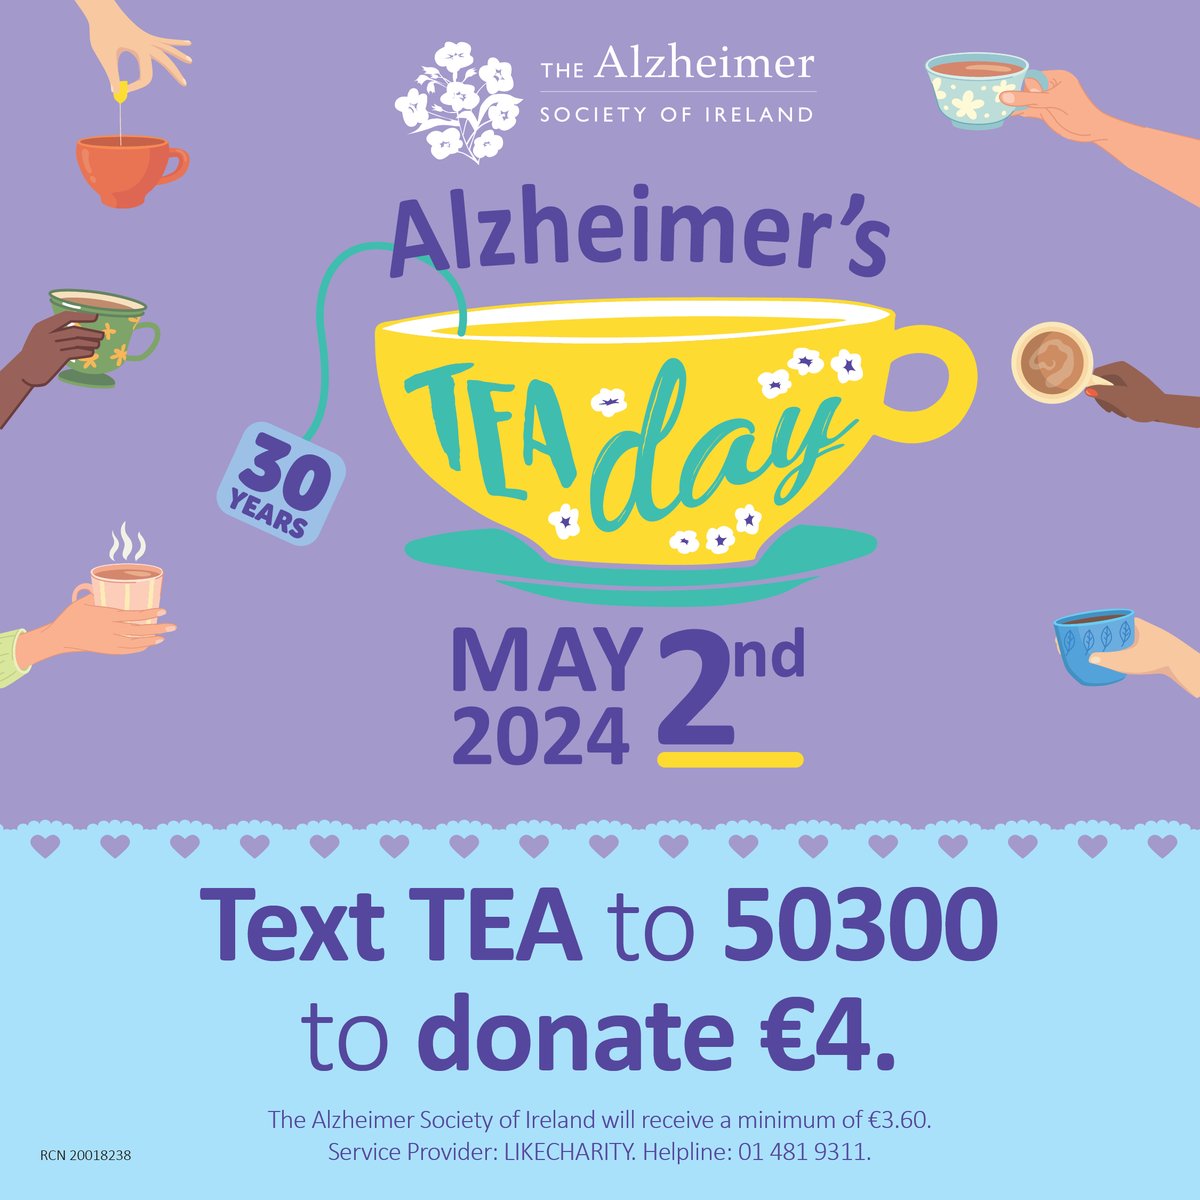 Today is Alzheimer’s Tea Day. Show your support now!💜 Text TEA to 50300 to donate €4. The Alzheimer Society of Ireland will receive a minimum of €3.60. Service Provider: LIKECHARITY. Helpline: 01 481 9311.